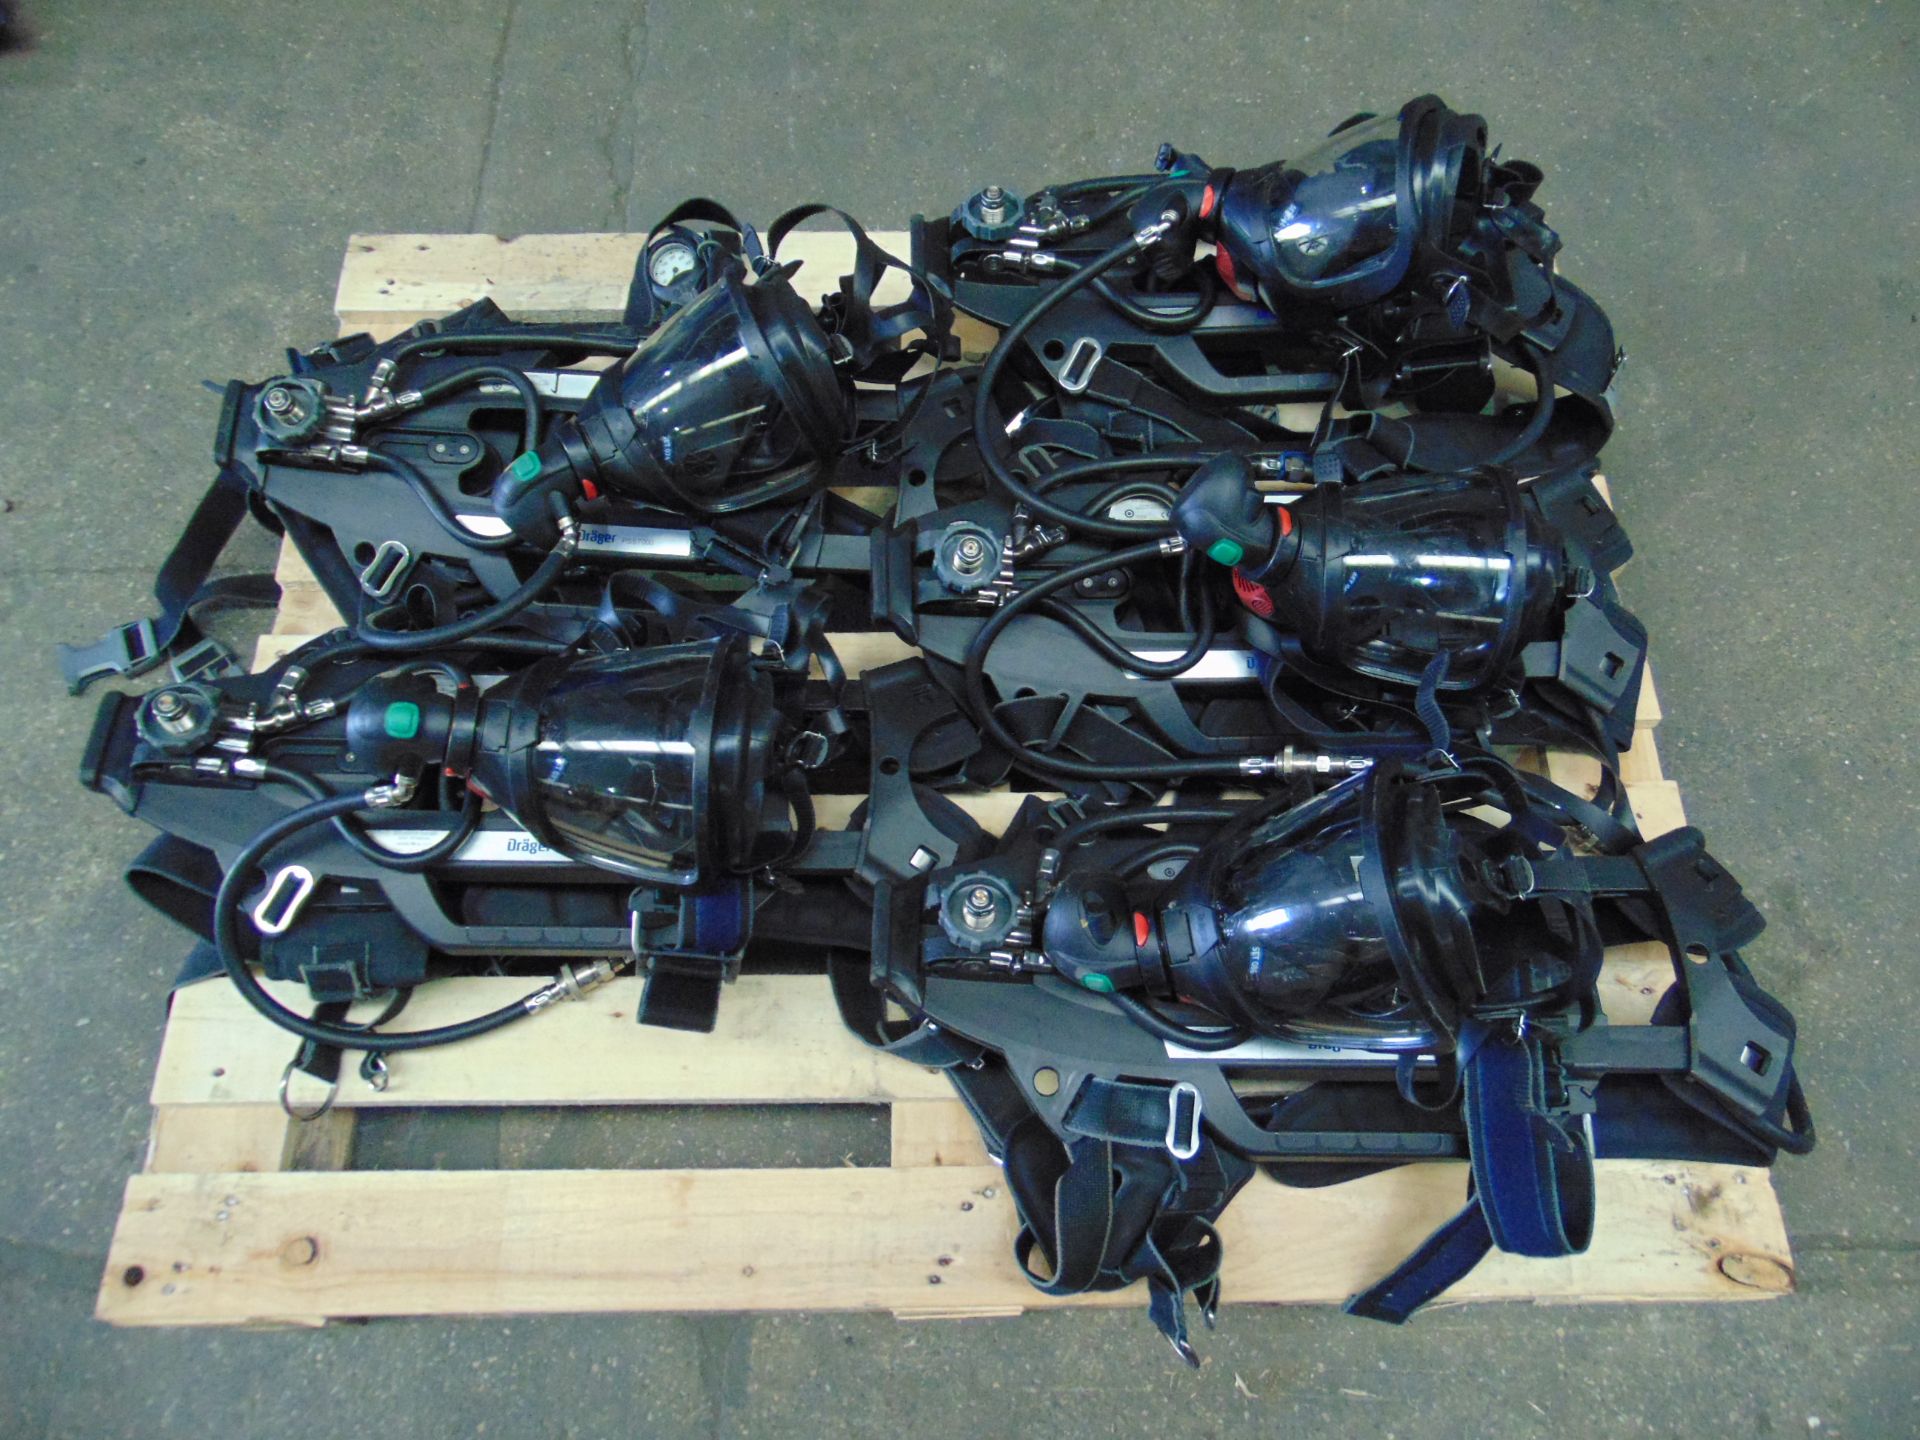 5 x Drager PSS 7000 Self Contained Breathing Apparatus w/ 10 x Drager 300 Bar Air Cylinders - Bild 9 aus 21